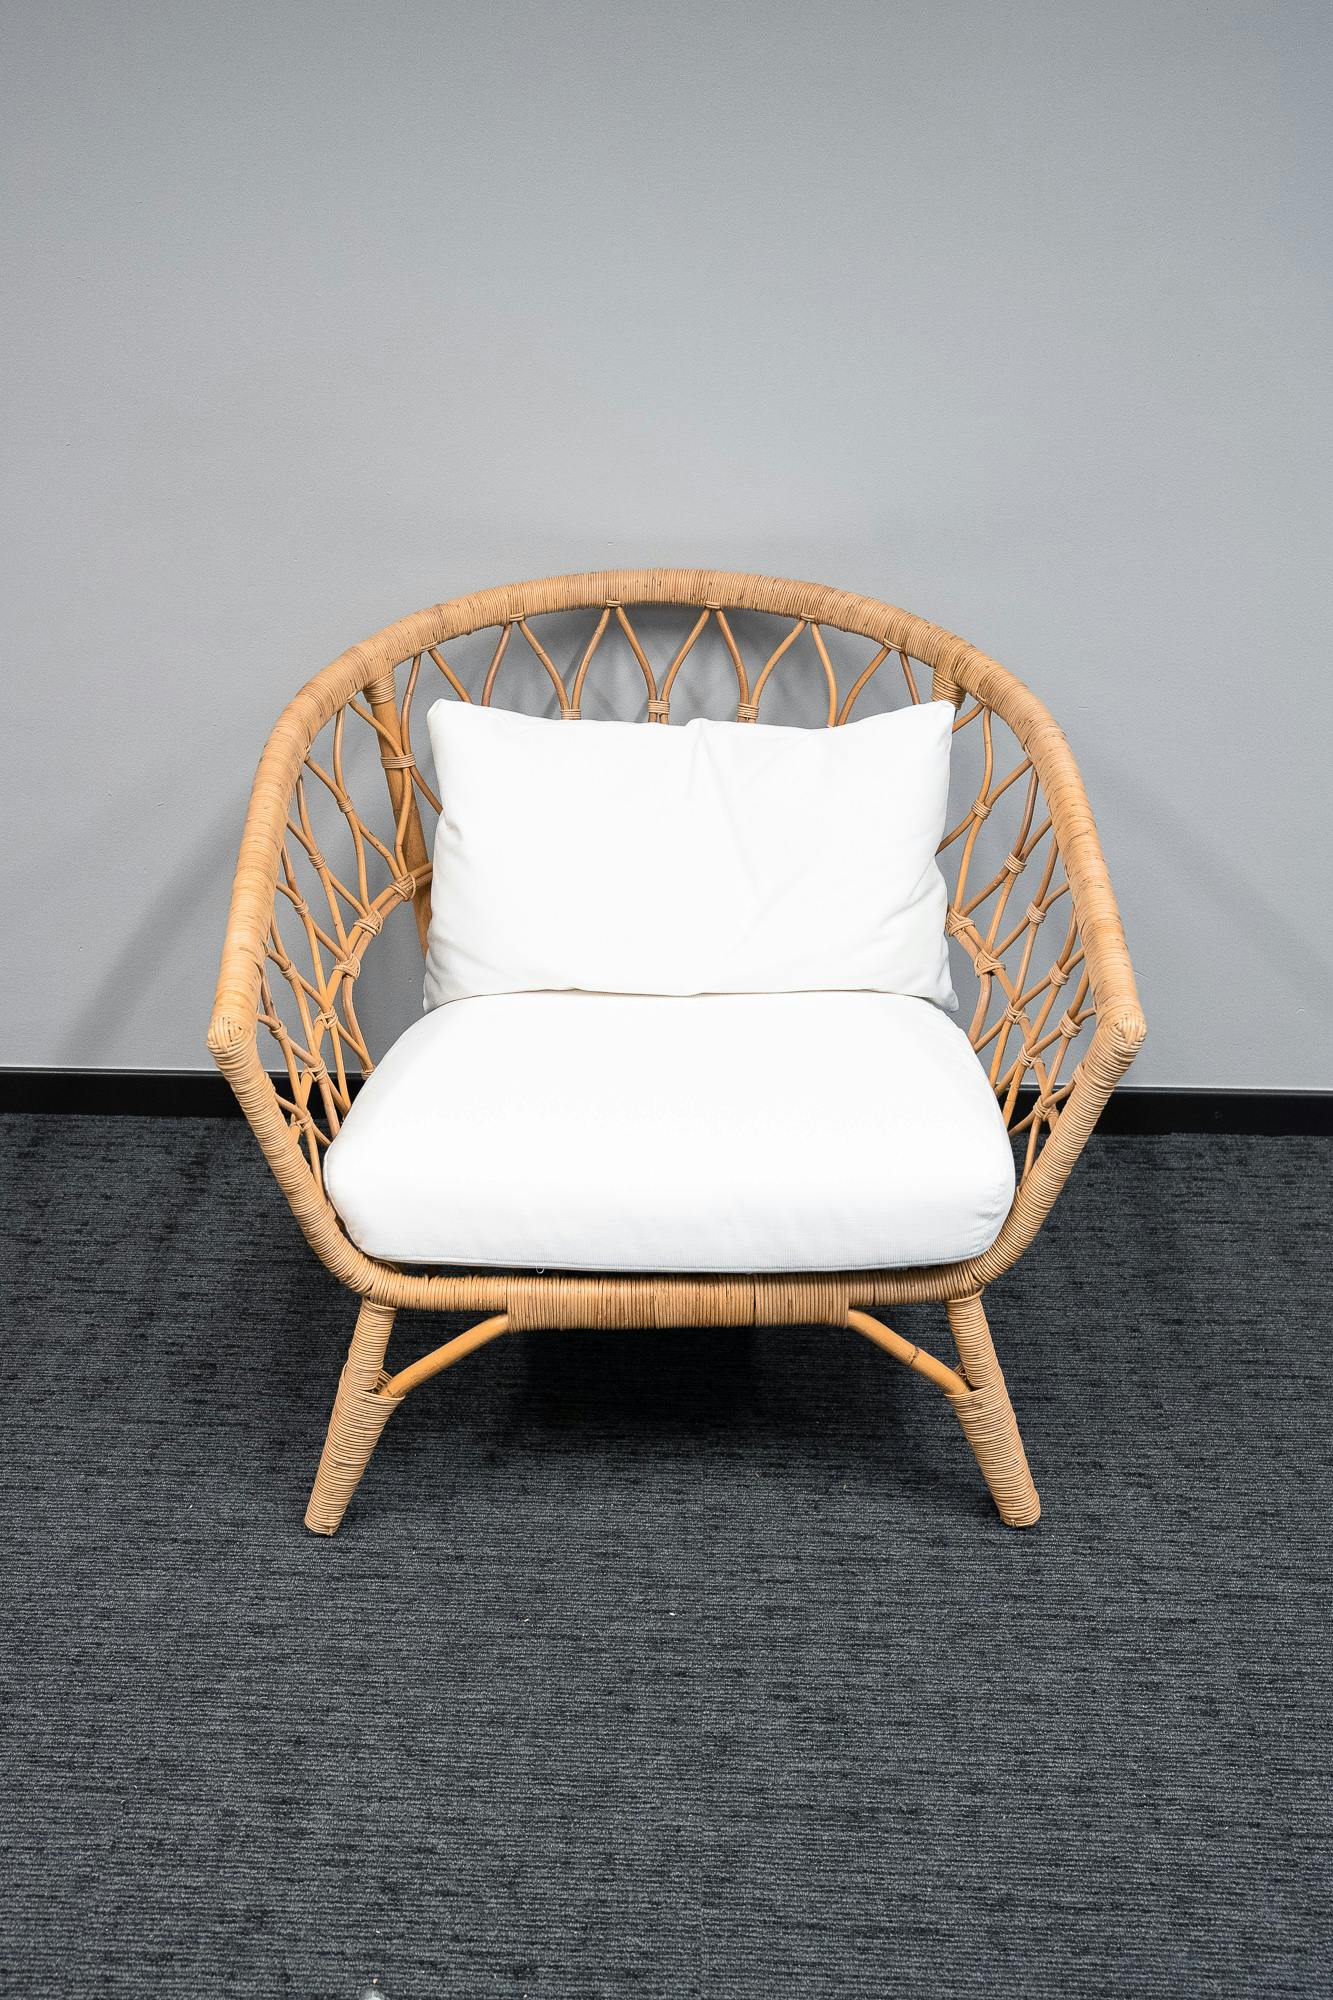 Wicker armchair with white cushions - Relieve Furniture